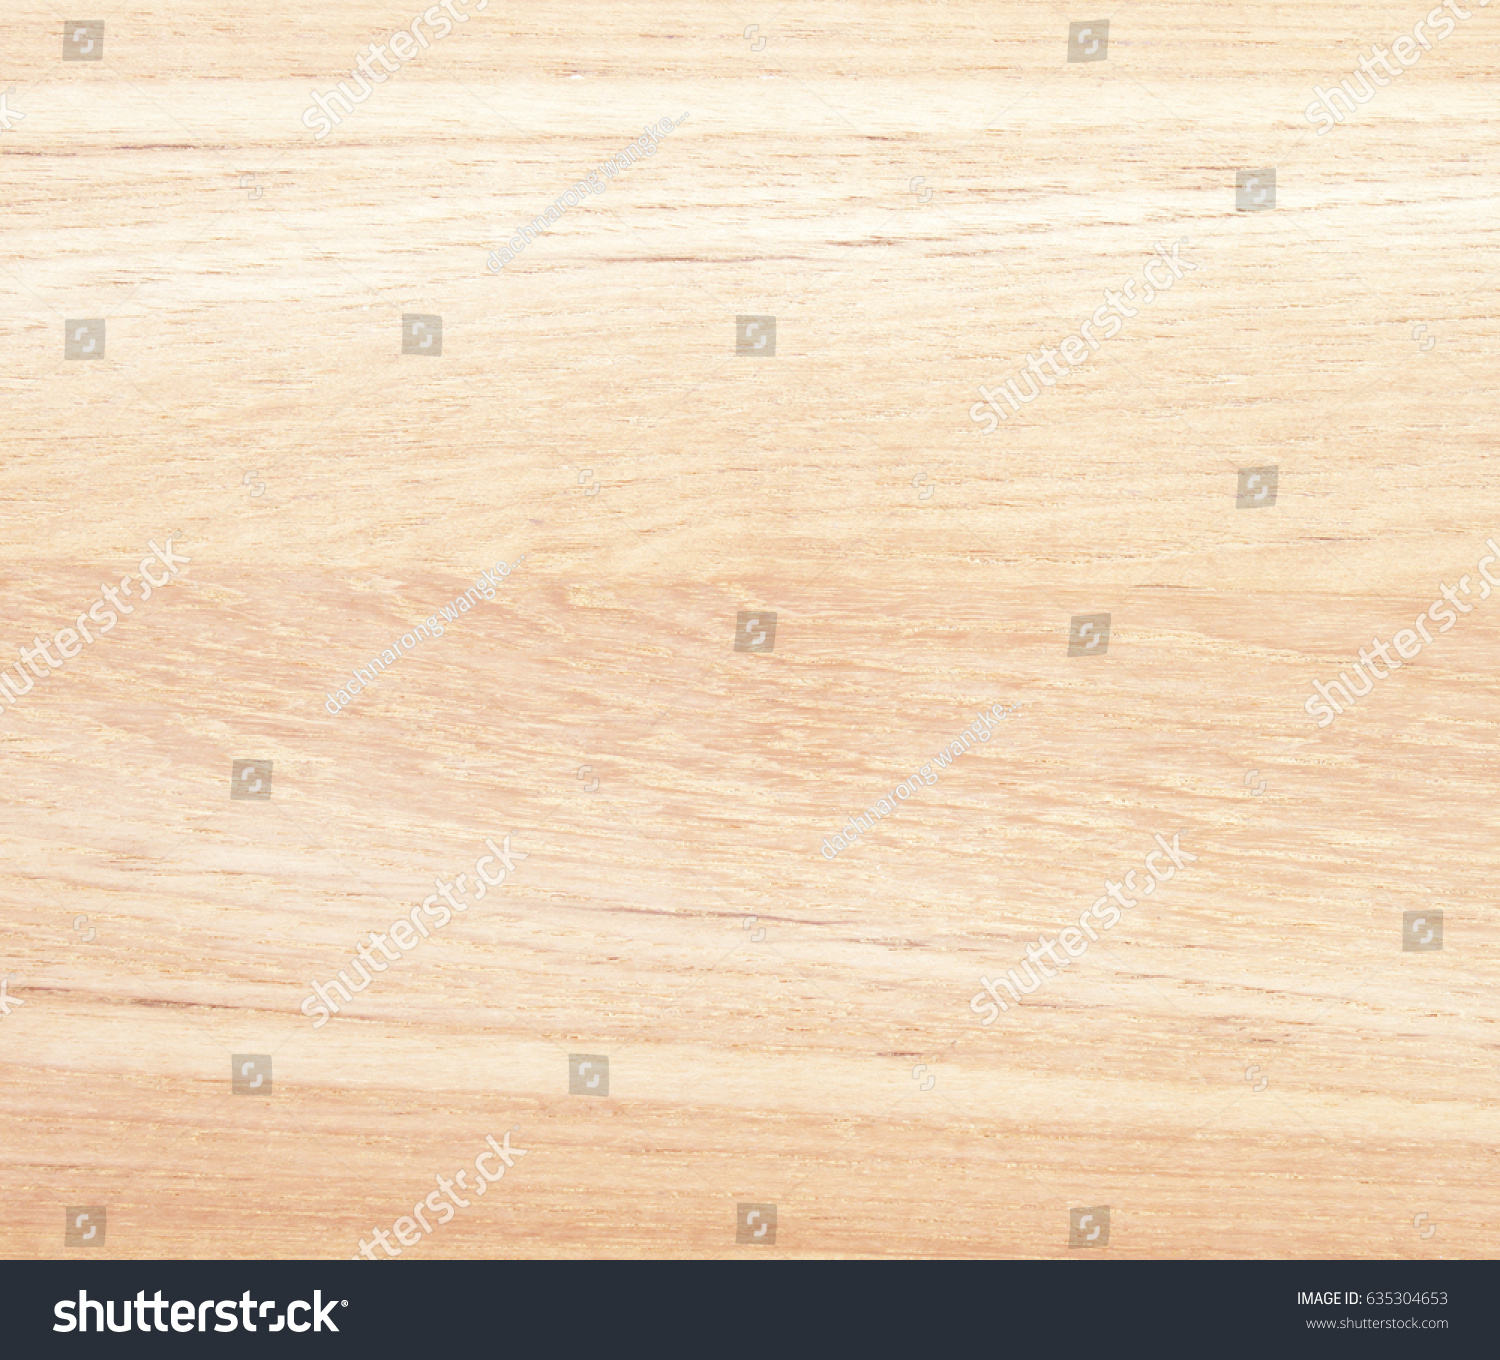 Texture of wood background closeup #635304653